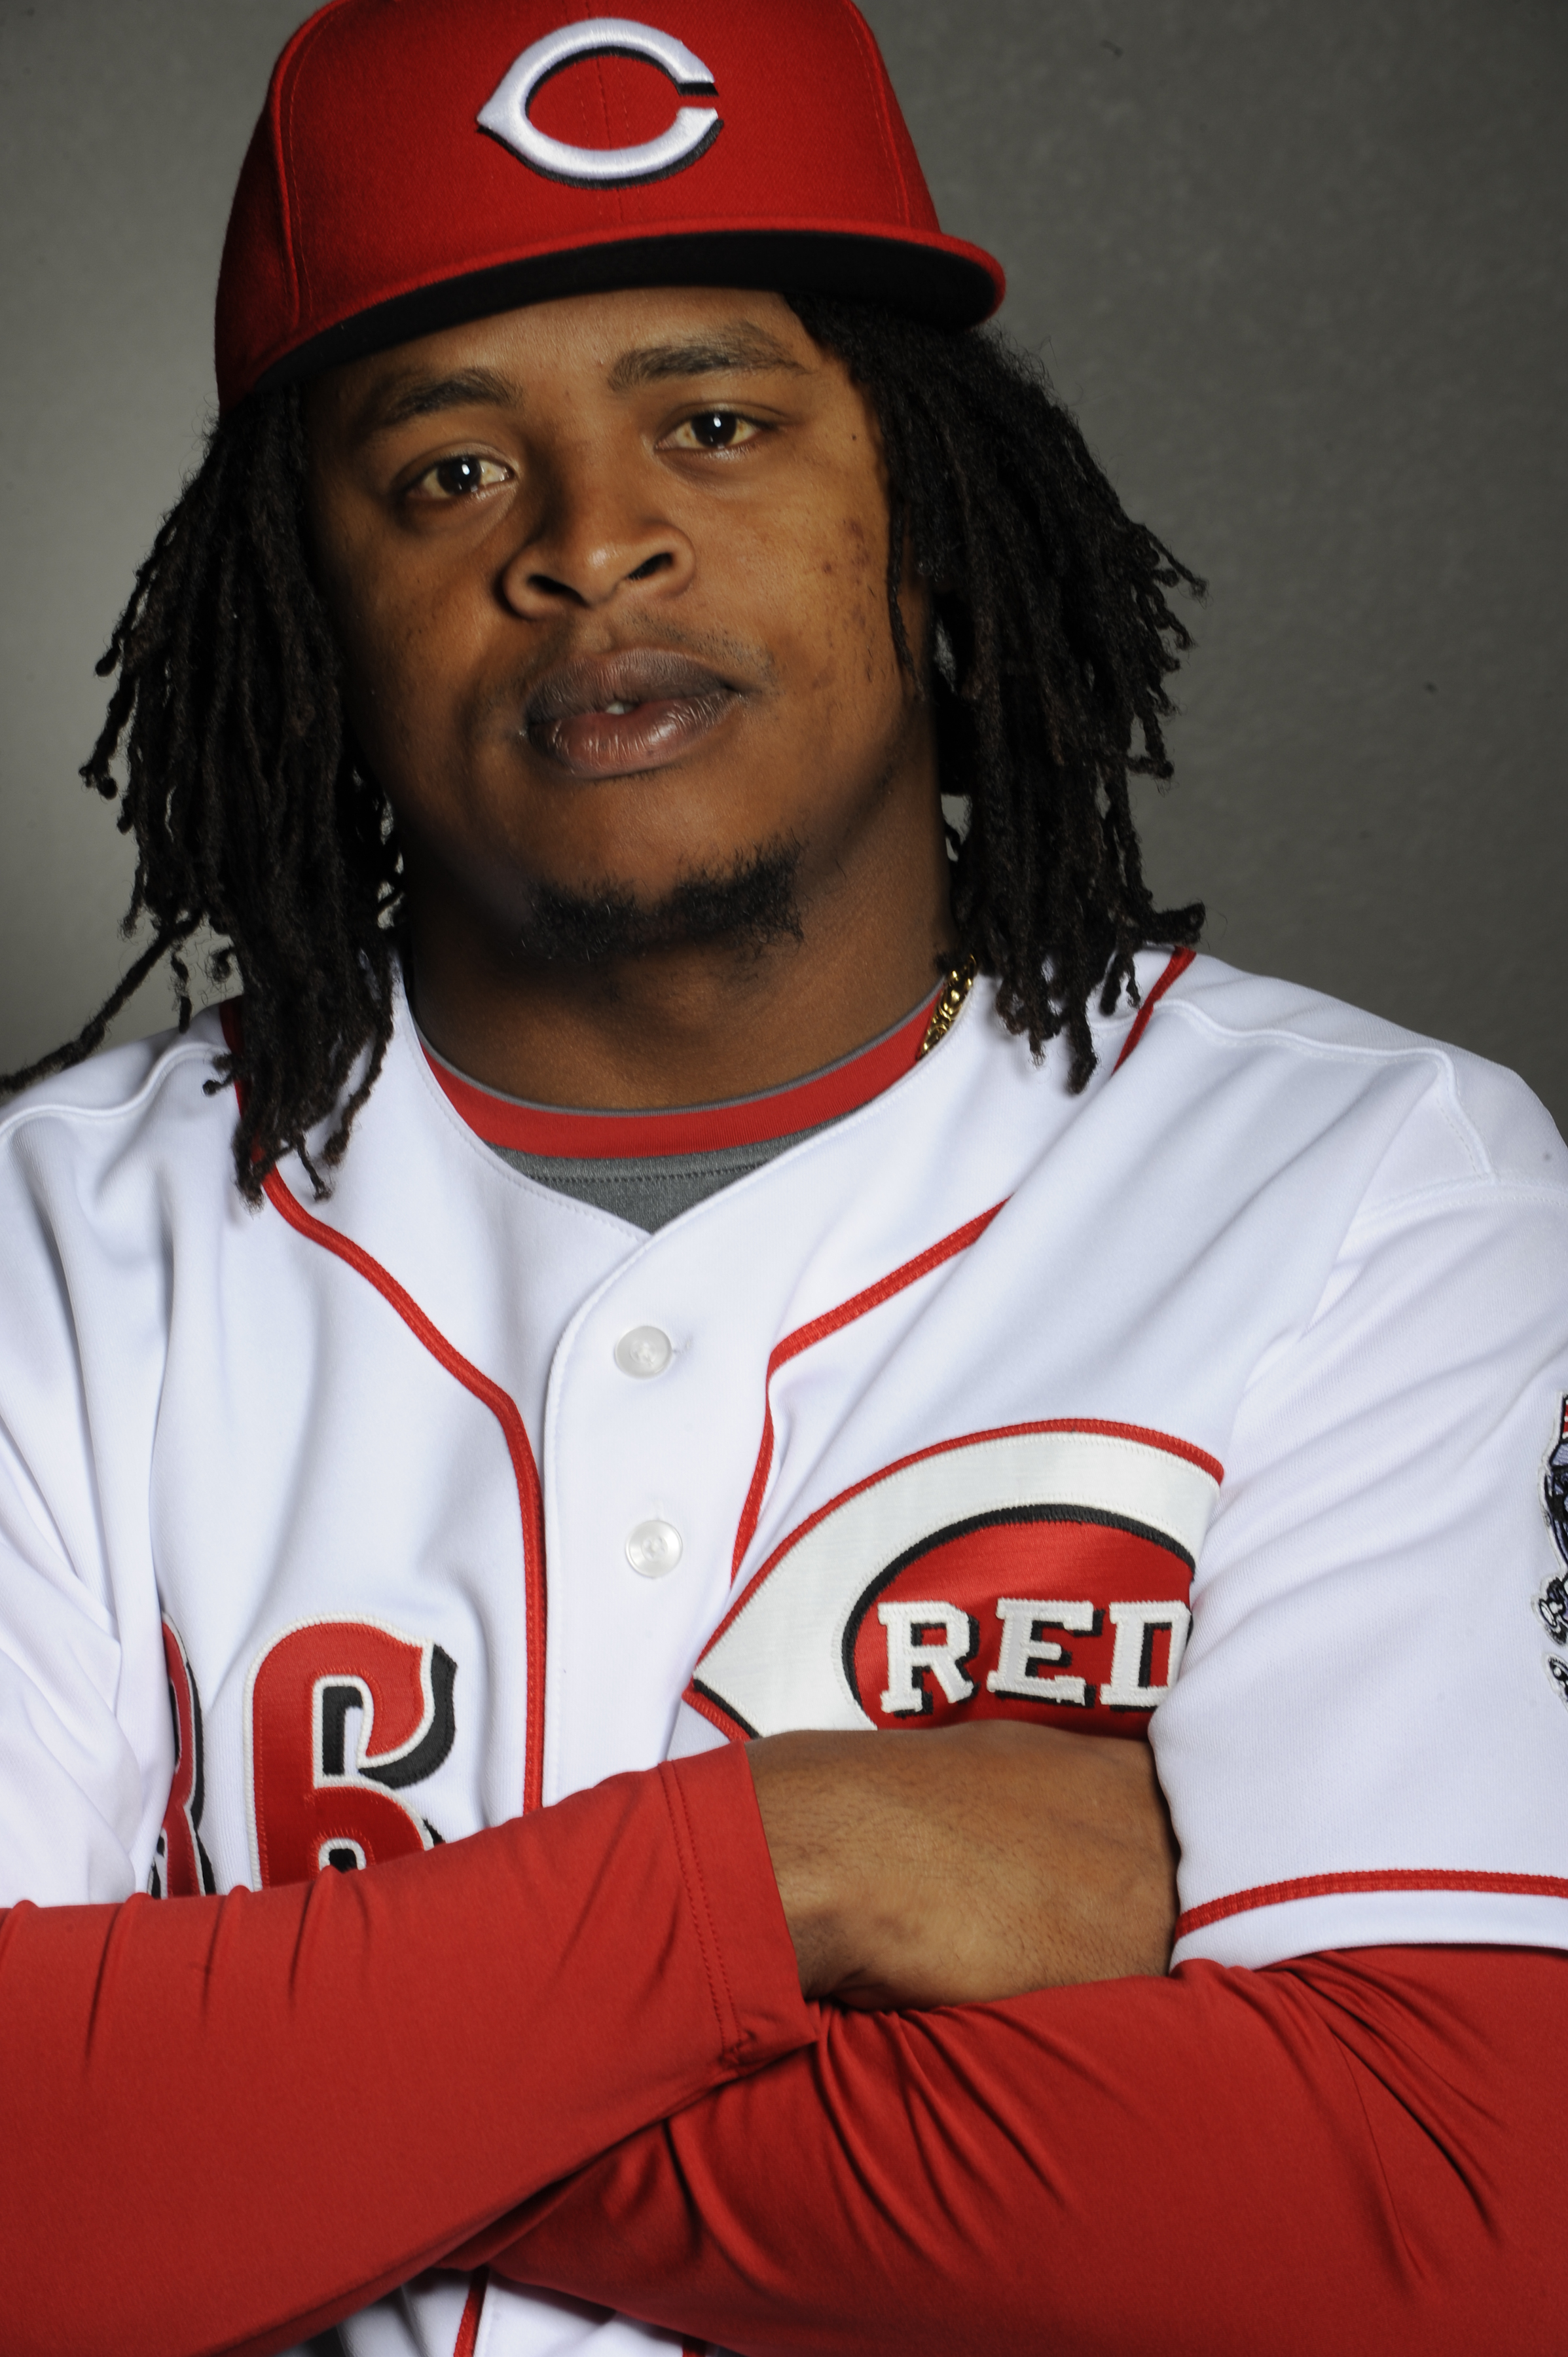 GOODYEAR, AZ - FEBRUARY 20: Edinson Volquez #36 of the Cincinnati Reds poses during the Cincinnati Reds photo day at the Cincinnati Reds Spring Training Complex on February 20, 2011 in Goodyear, Arizona. (Photo by Rob Tringali/Getty Images)